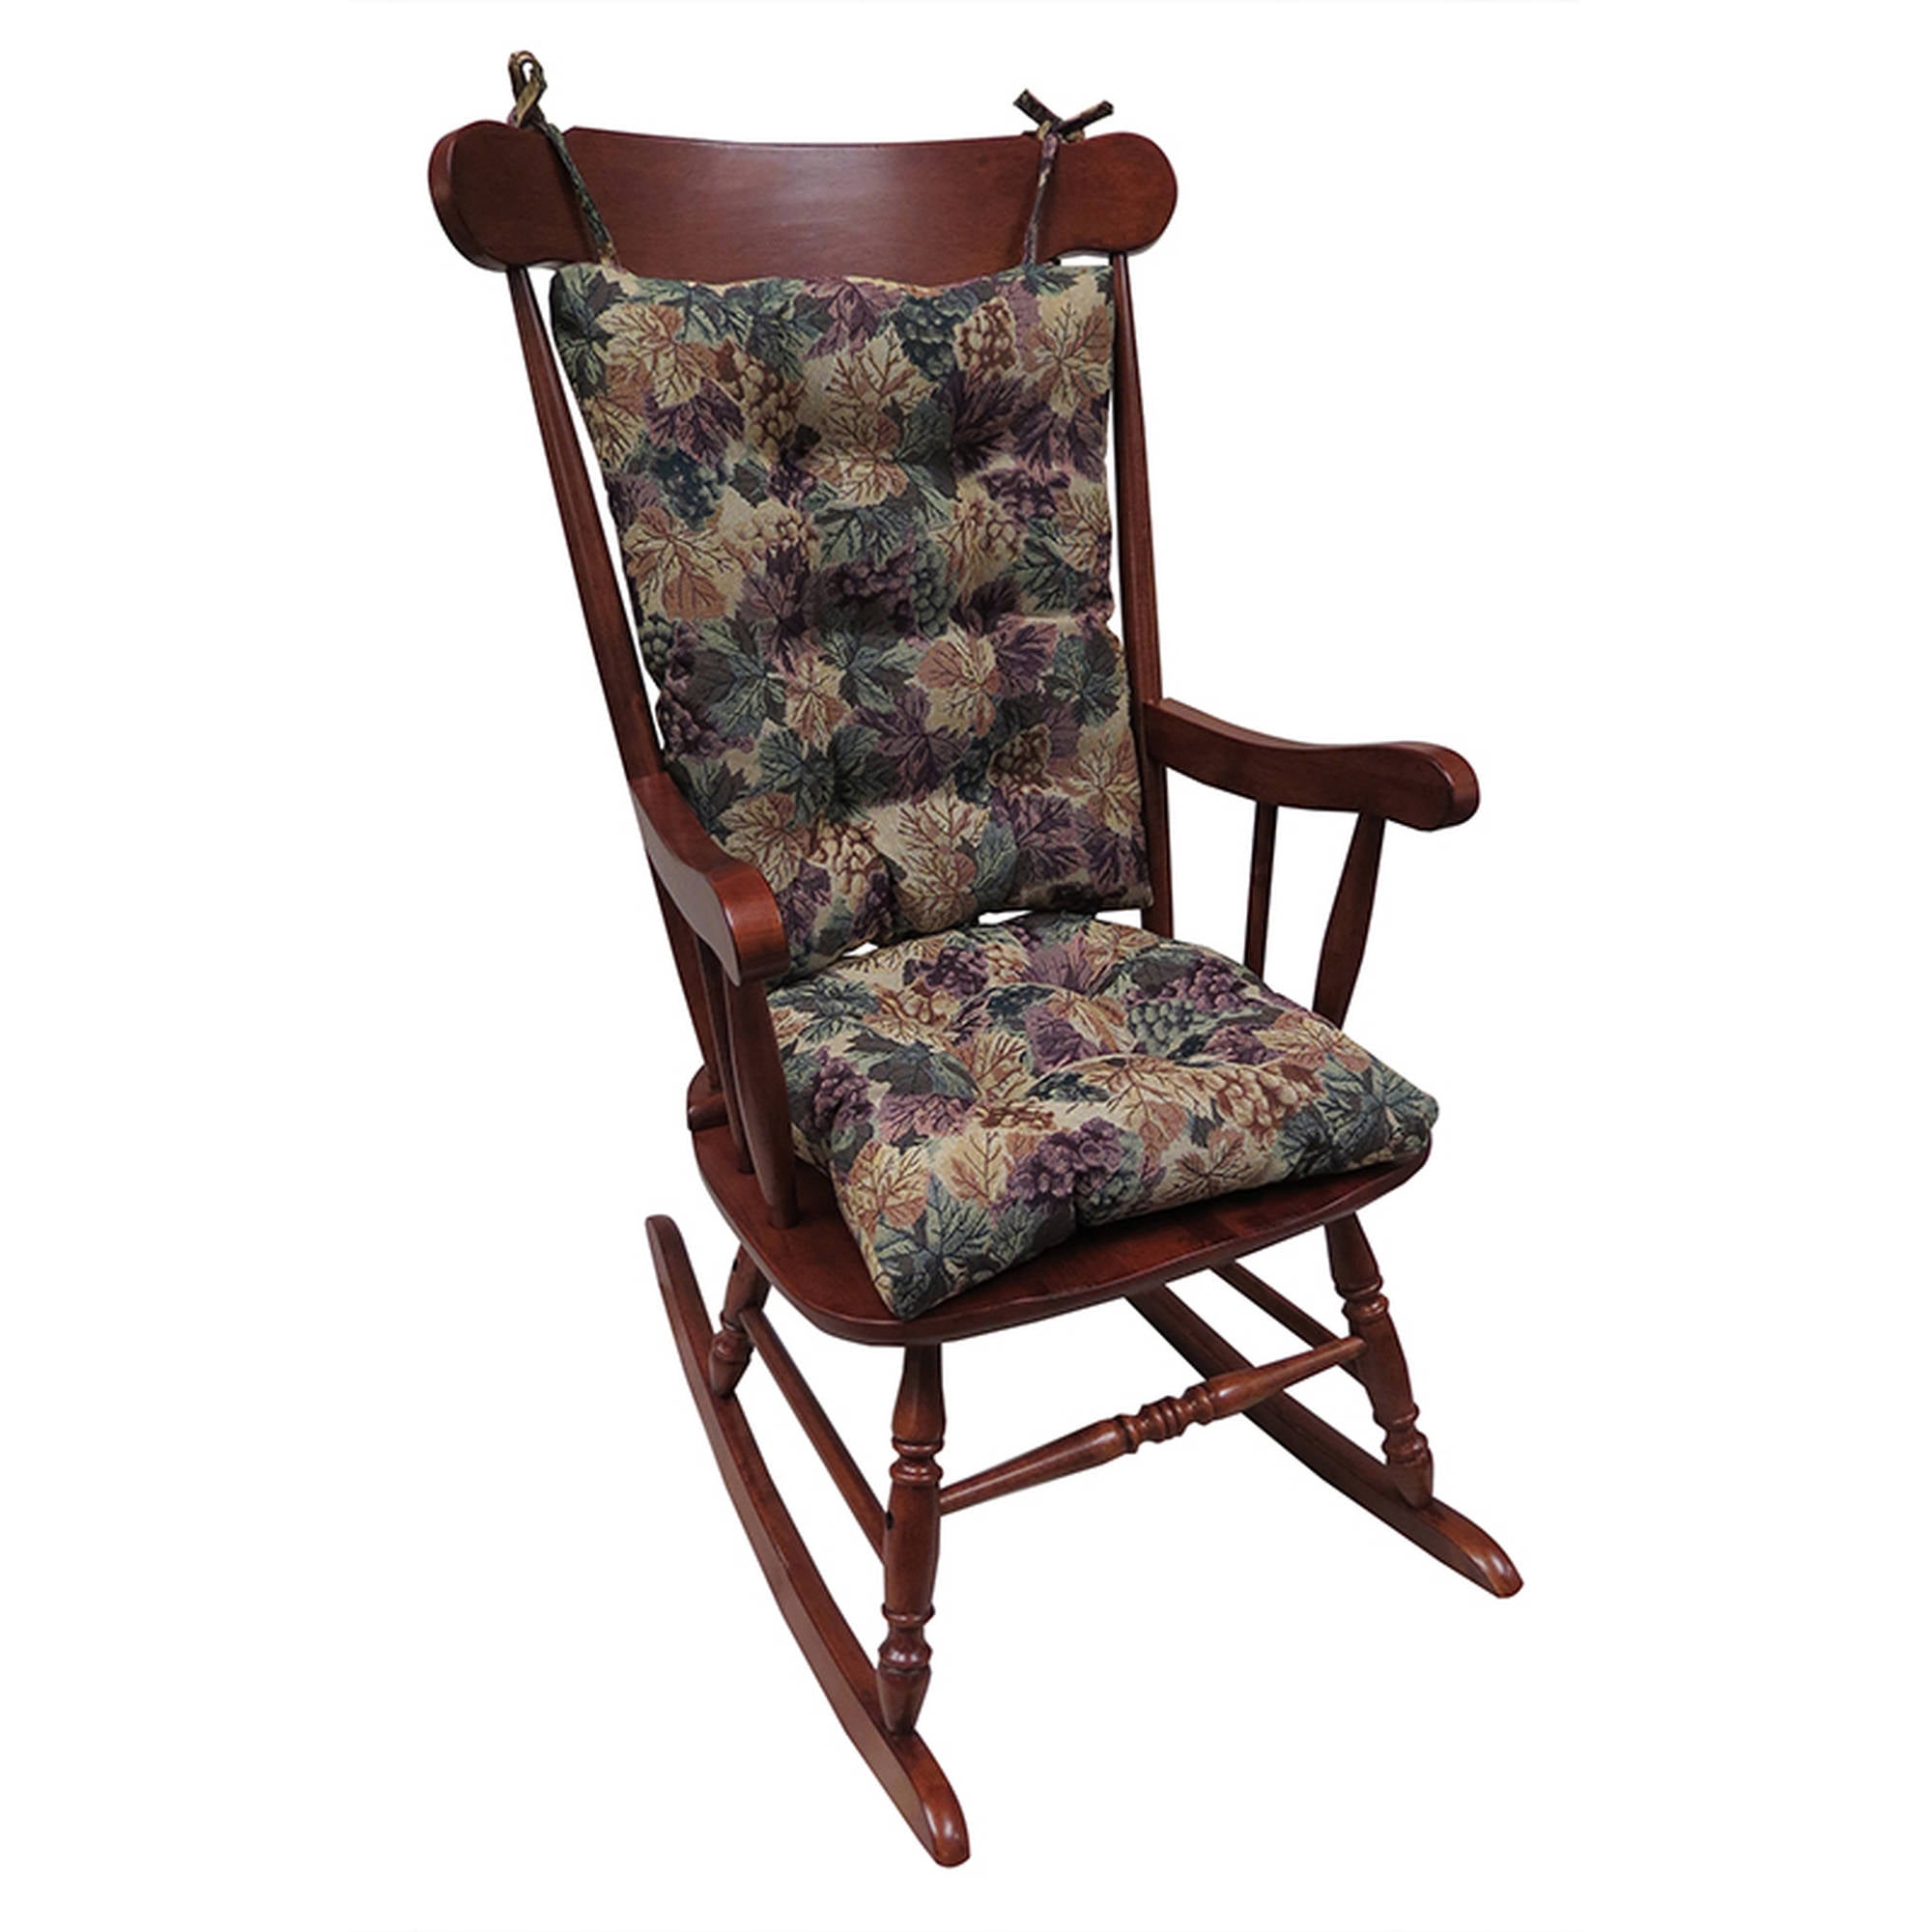 Gripper Non-slip Cabernet Tapestry Jumbo Rocking Chair Cushions 80 Polyester for sale online